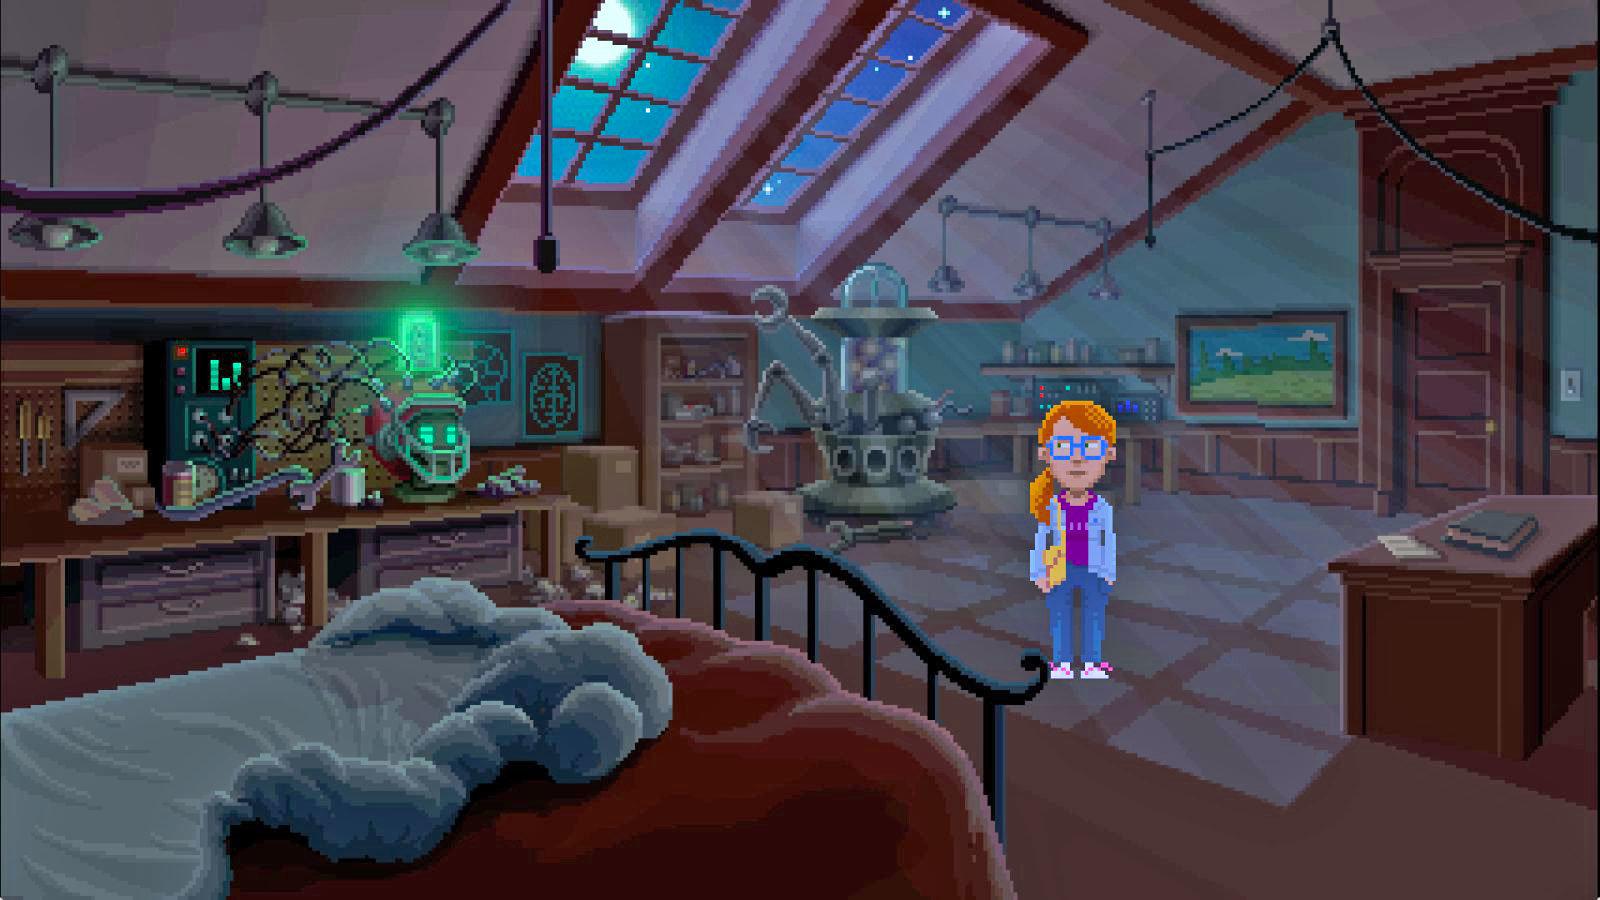 Retro adventure game 'Thimbleweed Park' hits PS4 August 22nd